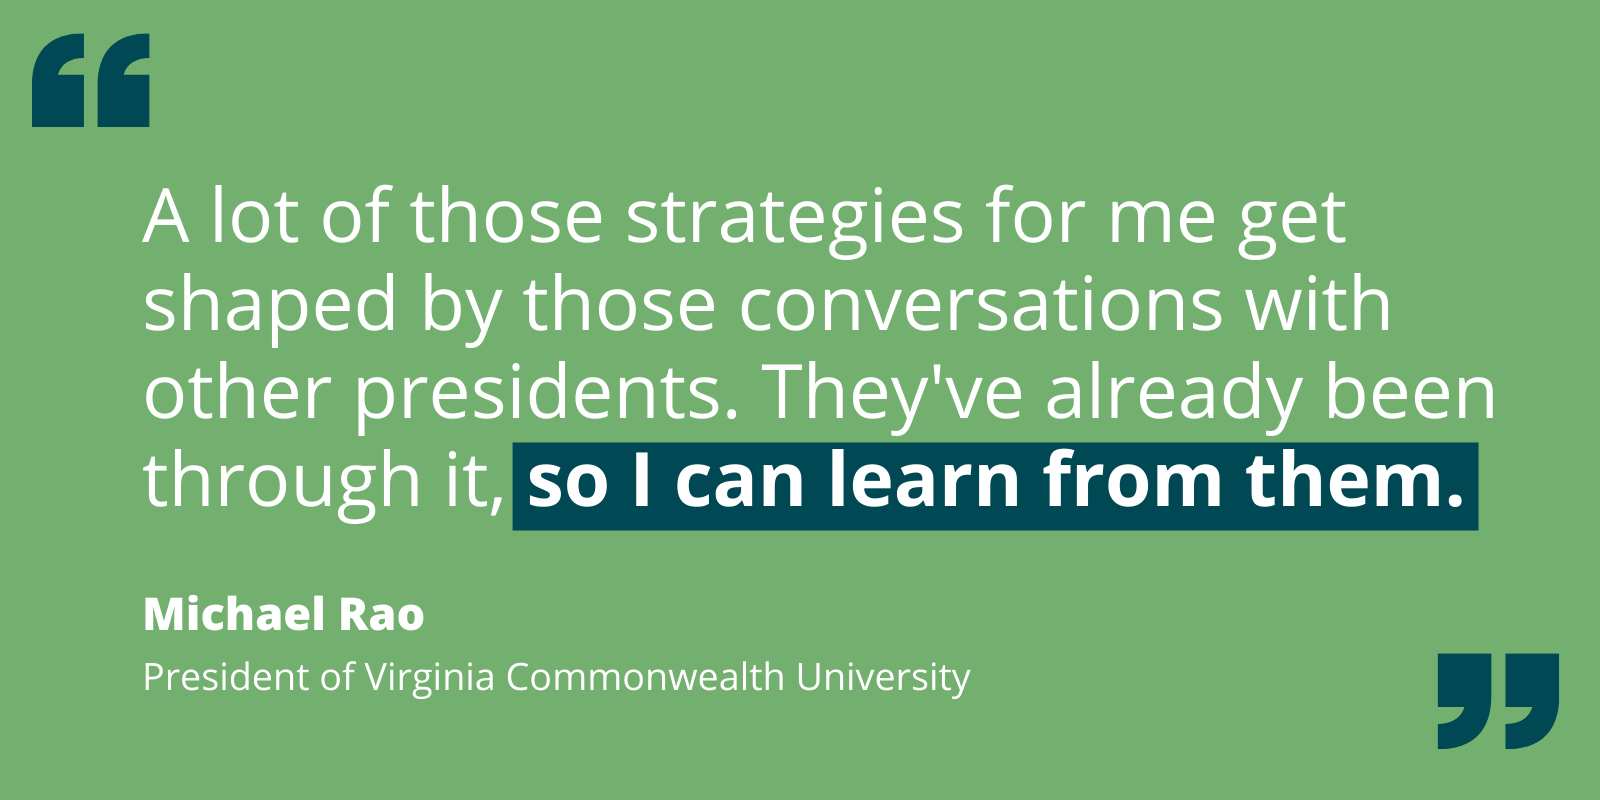 Quote by Michael Rao re: shaping his own strategies by learning from his conversations with other presidents.